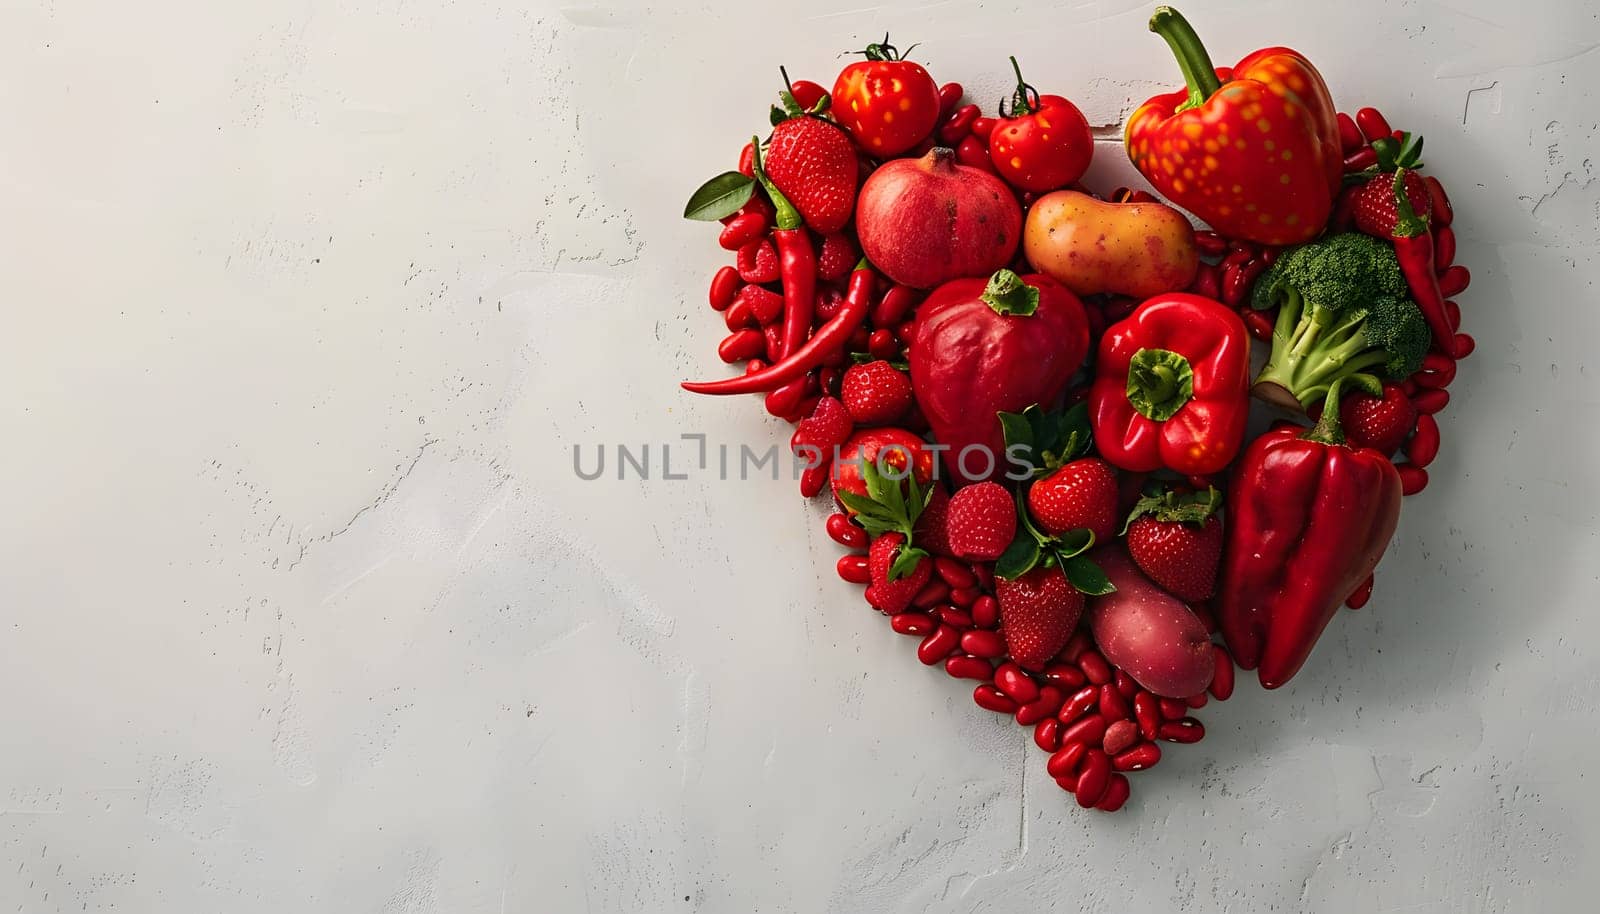 Heartshaped arrangement of red fruits veggies on white surface by Nadtochiy